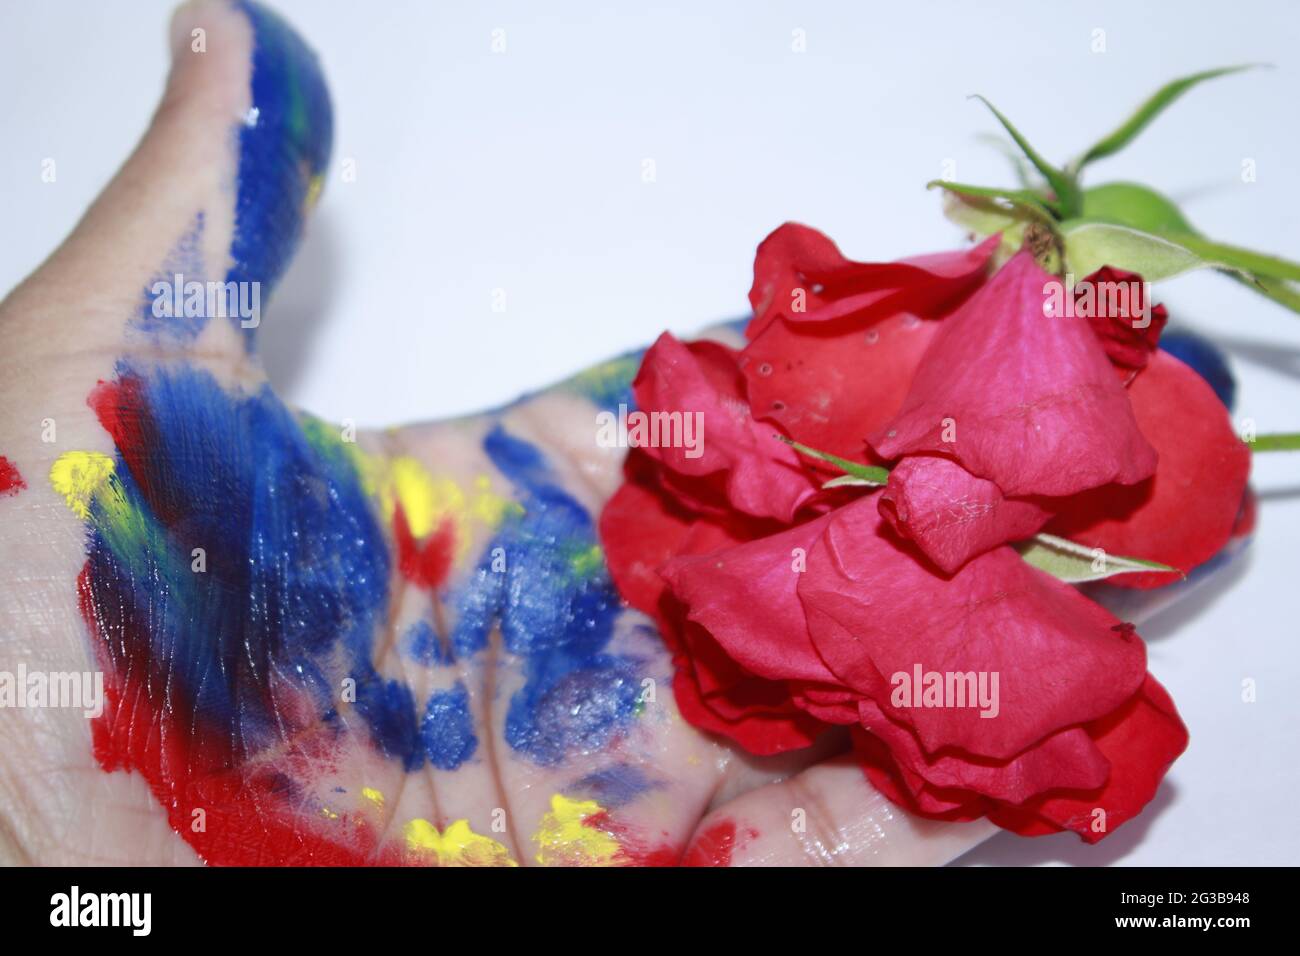 Red Rose's Petals and Lady colorful hand on white background. Stock Photo